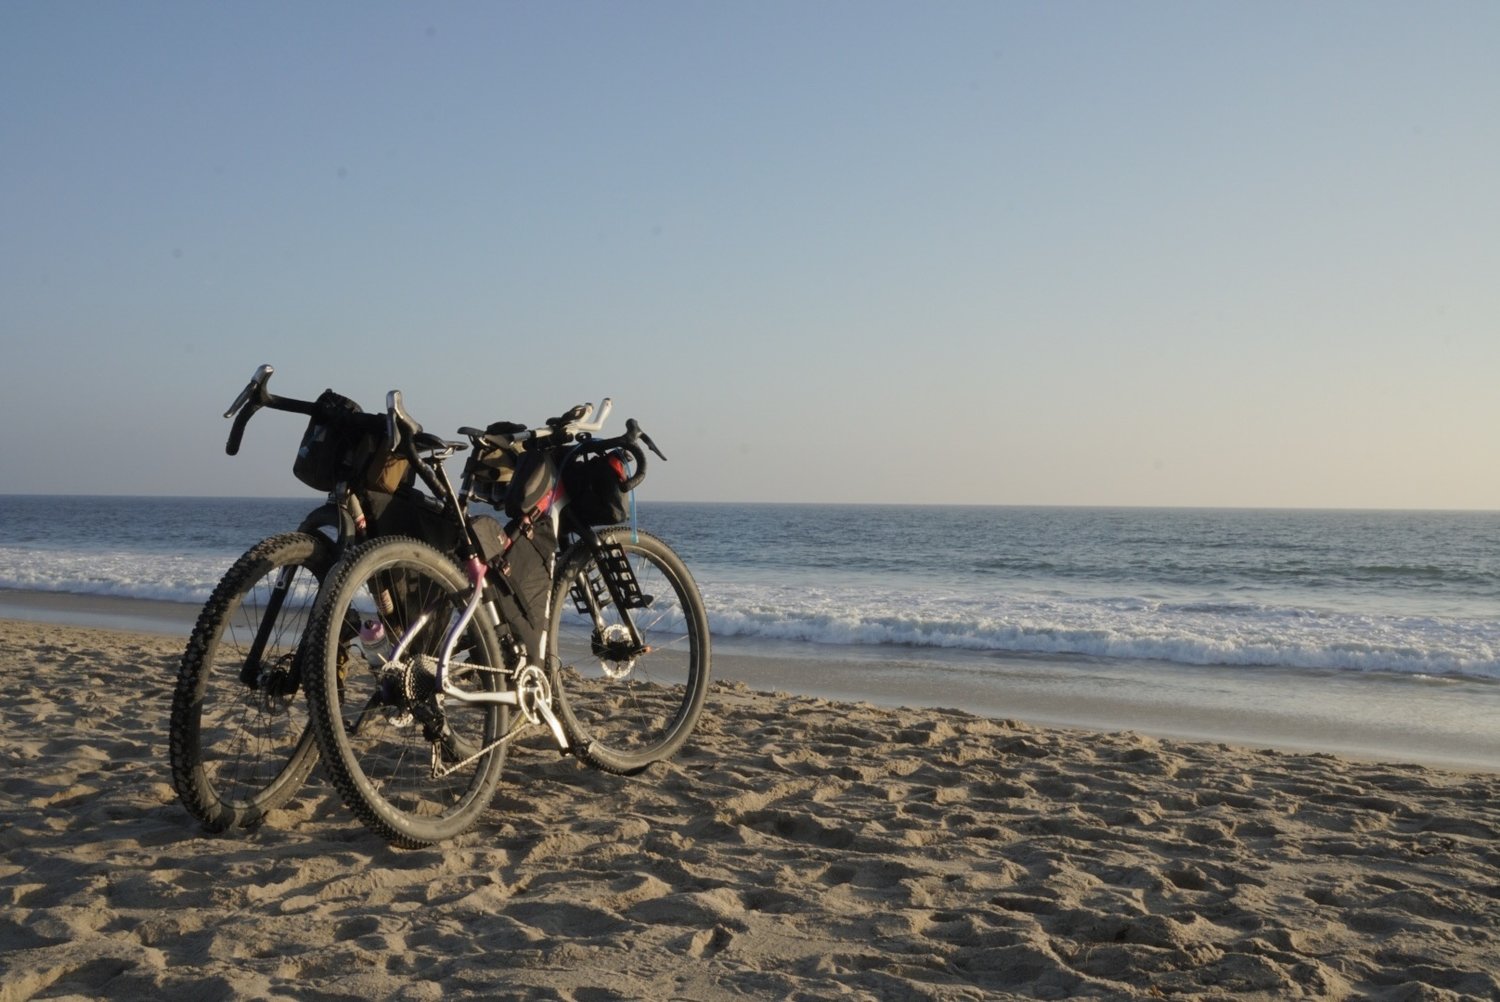 Bikes on the beach in Los Angeles